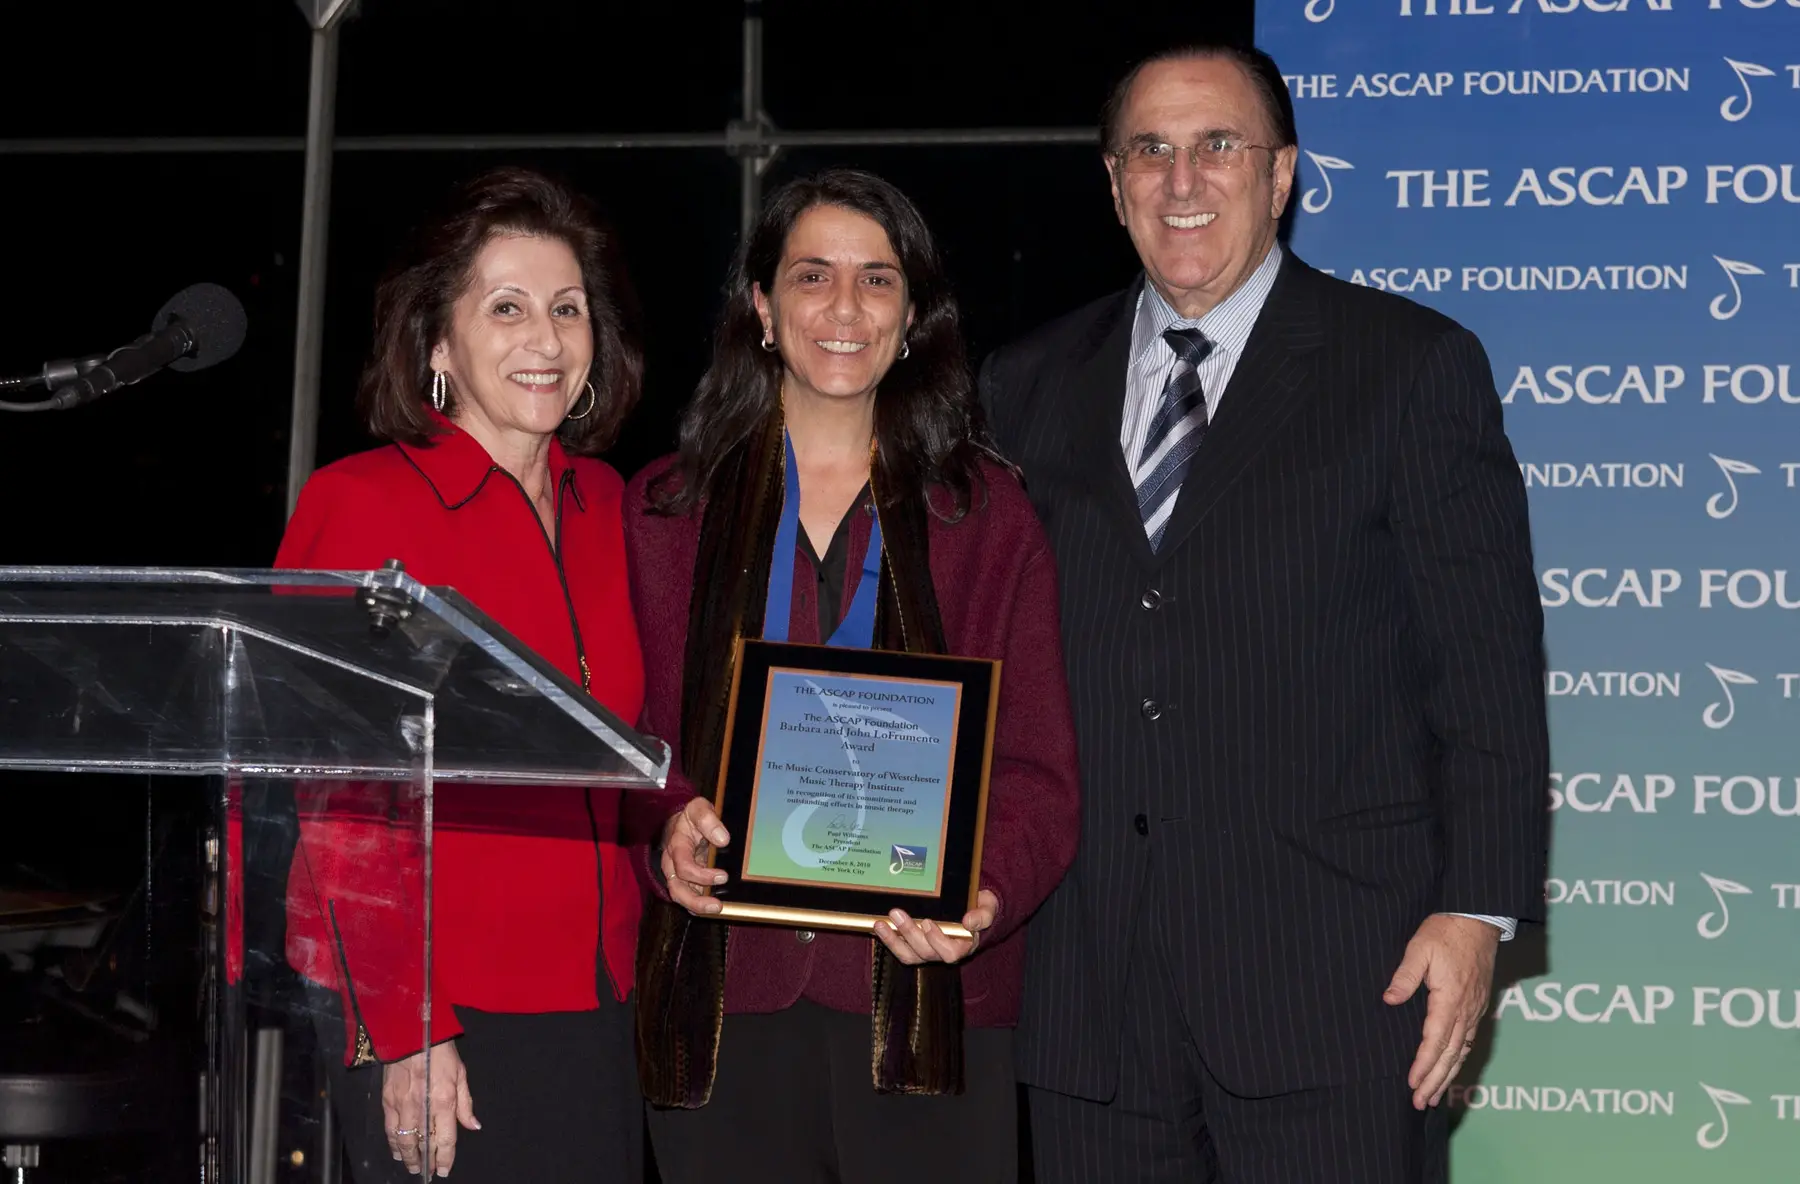 ASCAP CEO John LoFrumento (r) and his wife Barbara (l) present The ASCAP Foundation Barbara and John LoFrumento Award to Lisa Sandagata, Director of Outreach Services for the Music Conservatory of Westchester’s Music Therapy Institute.